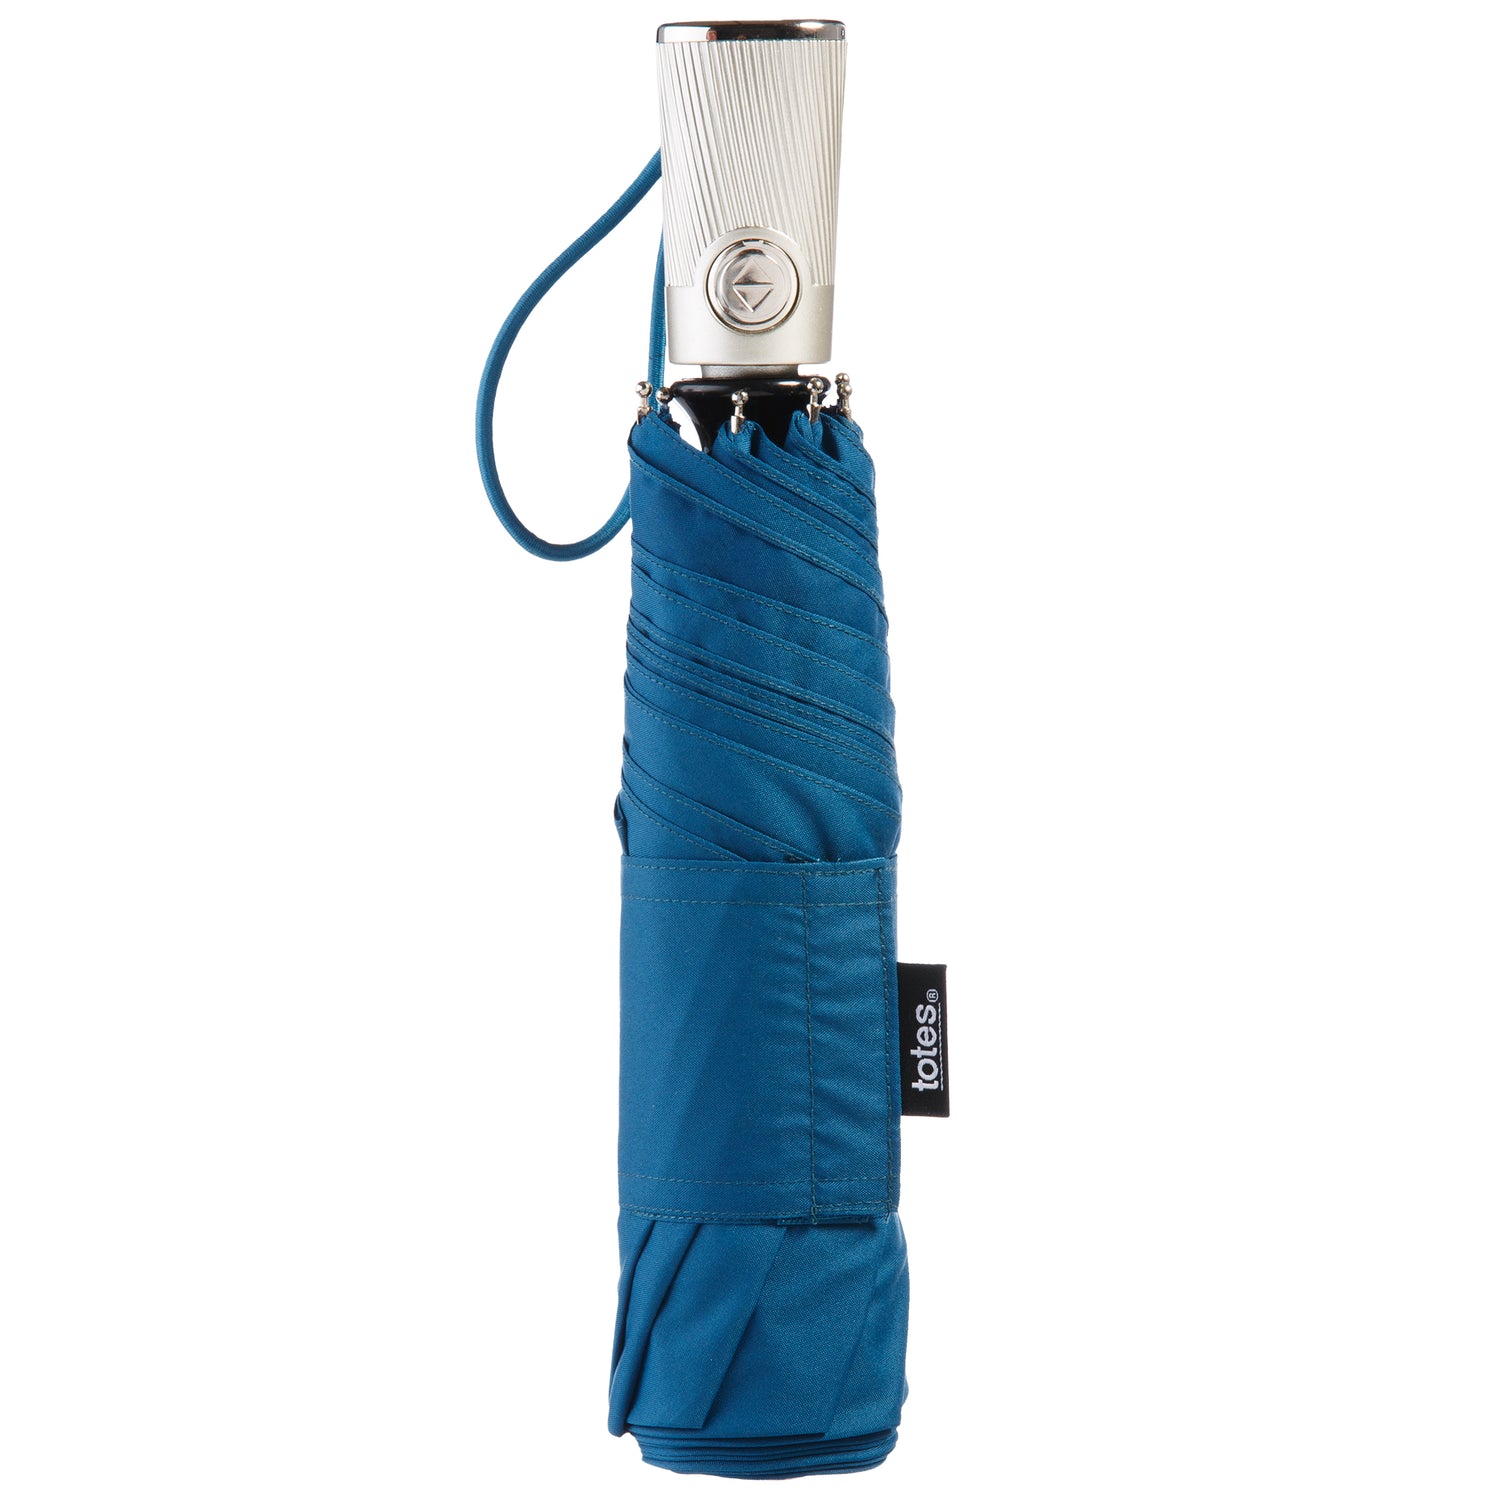 Recycled Titan® Folding Umbrella with Auto Open Close Technology